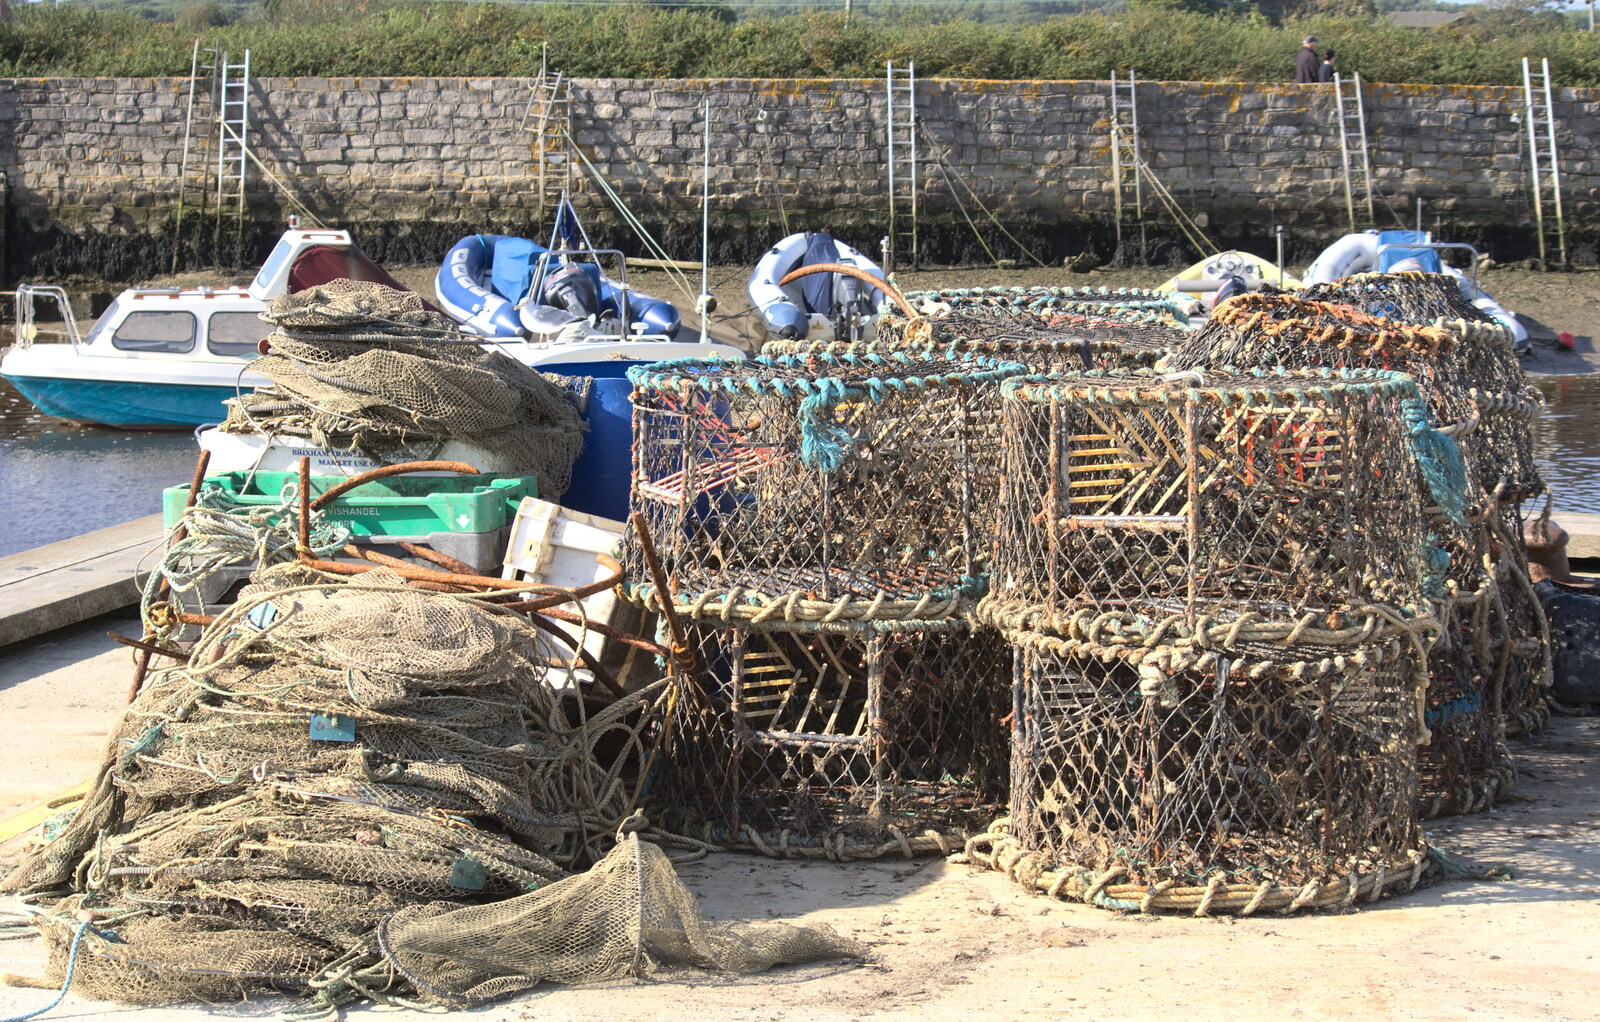 Crab pots from A Trip to Hurst Castle, Keyhaven, Hampshire - 28th August 2015